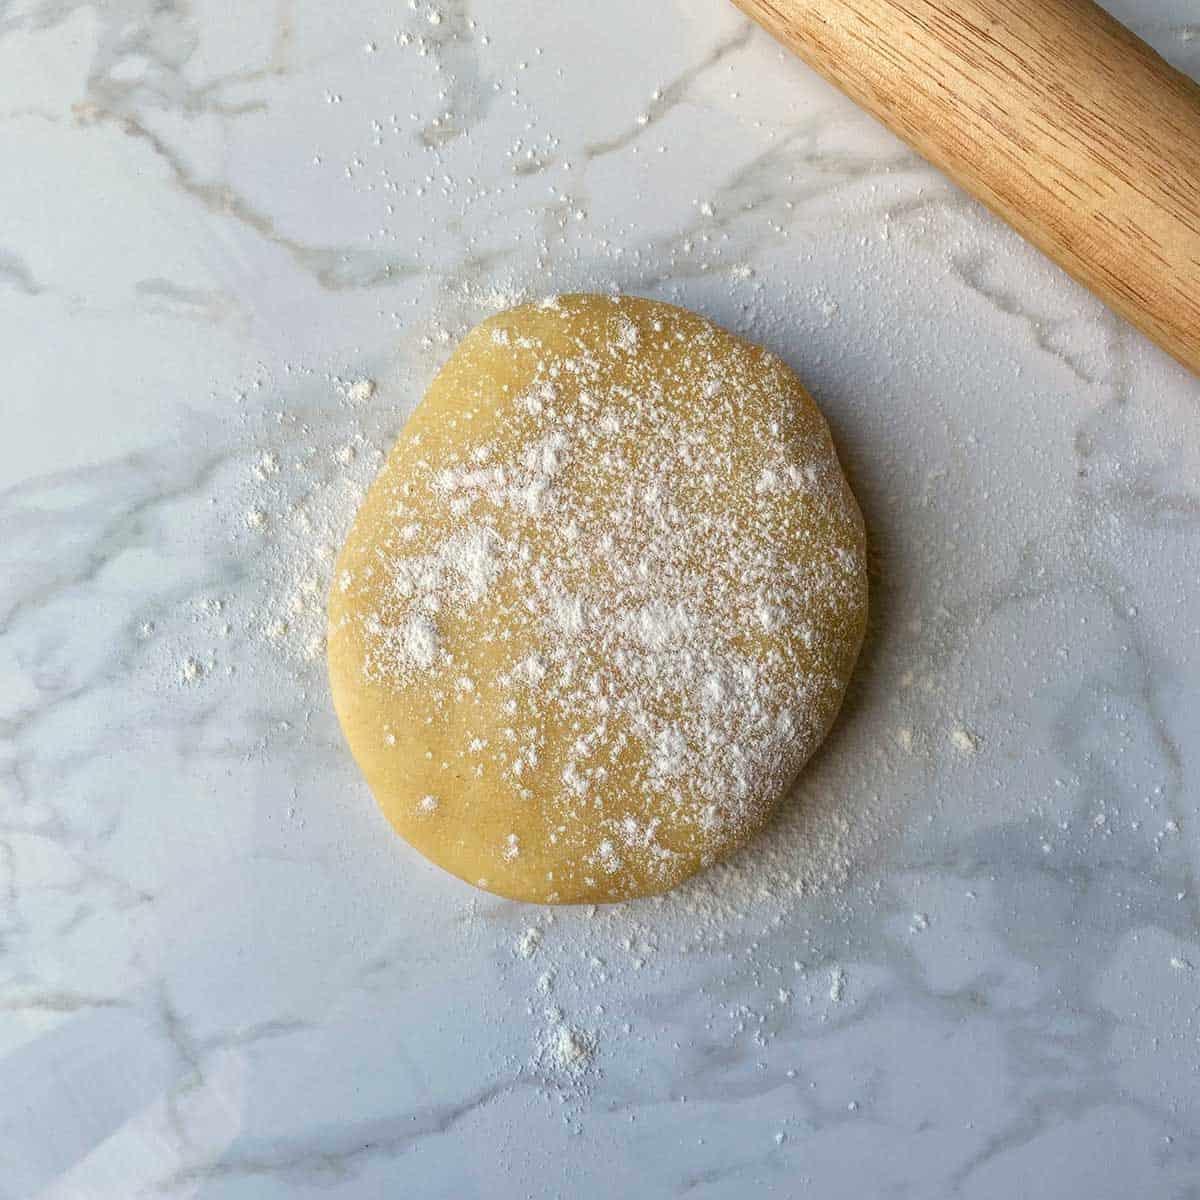 A ball of dough sprinkled with flour next to a rolling pin on a white bench.